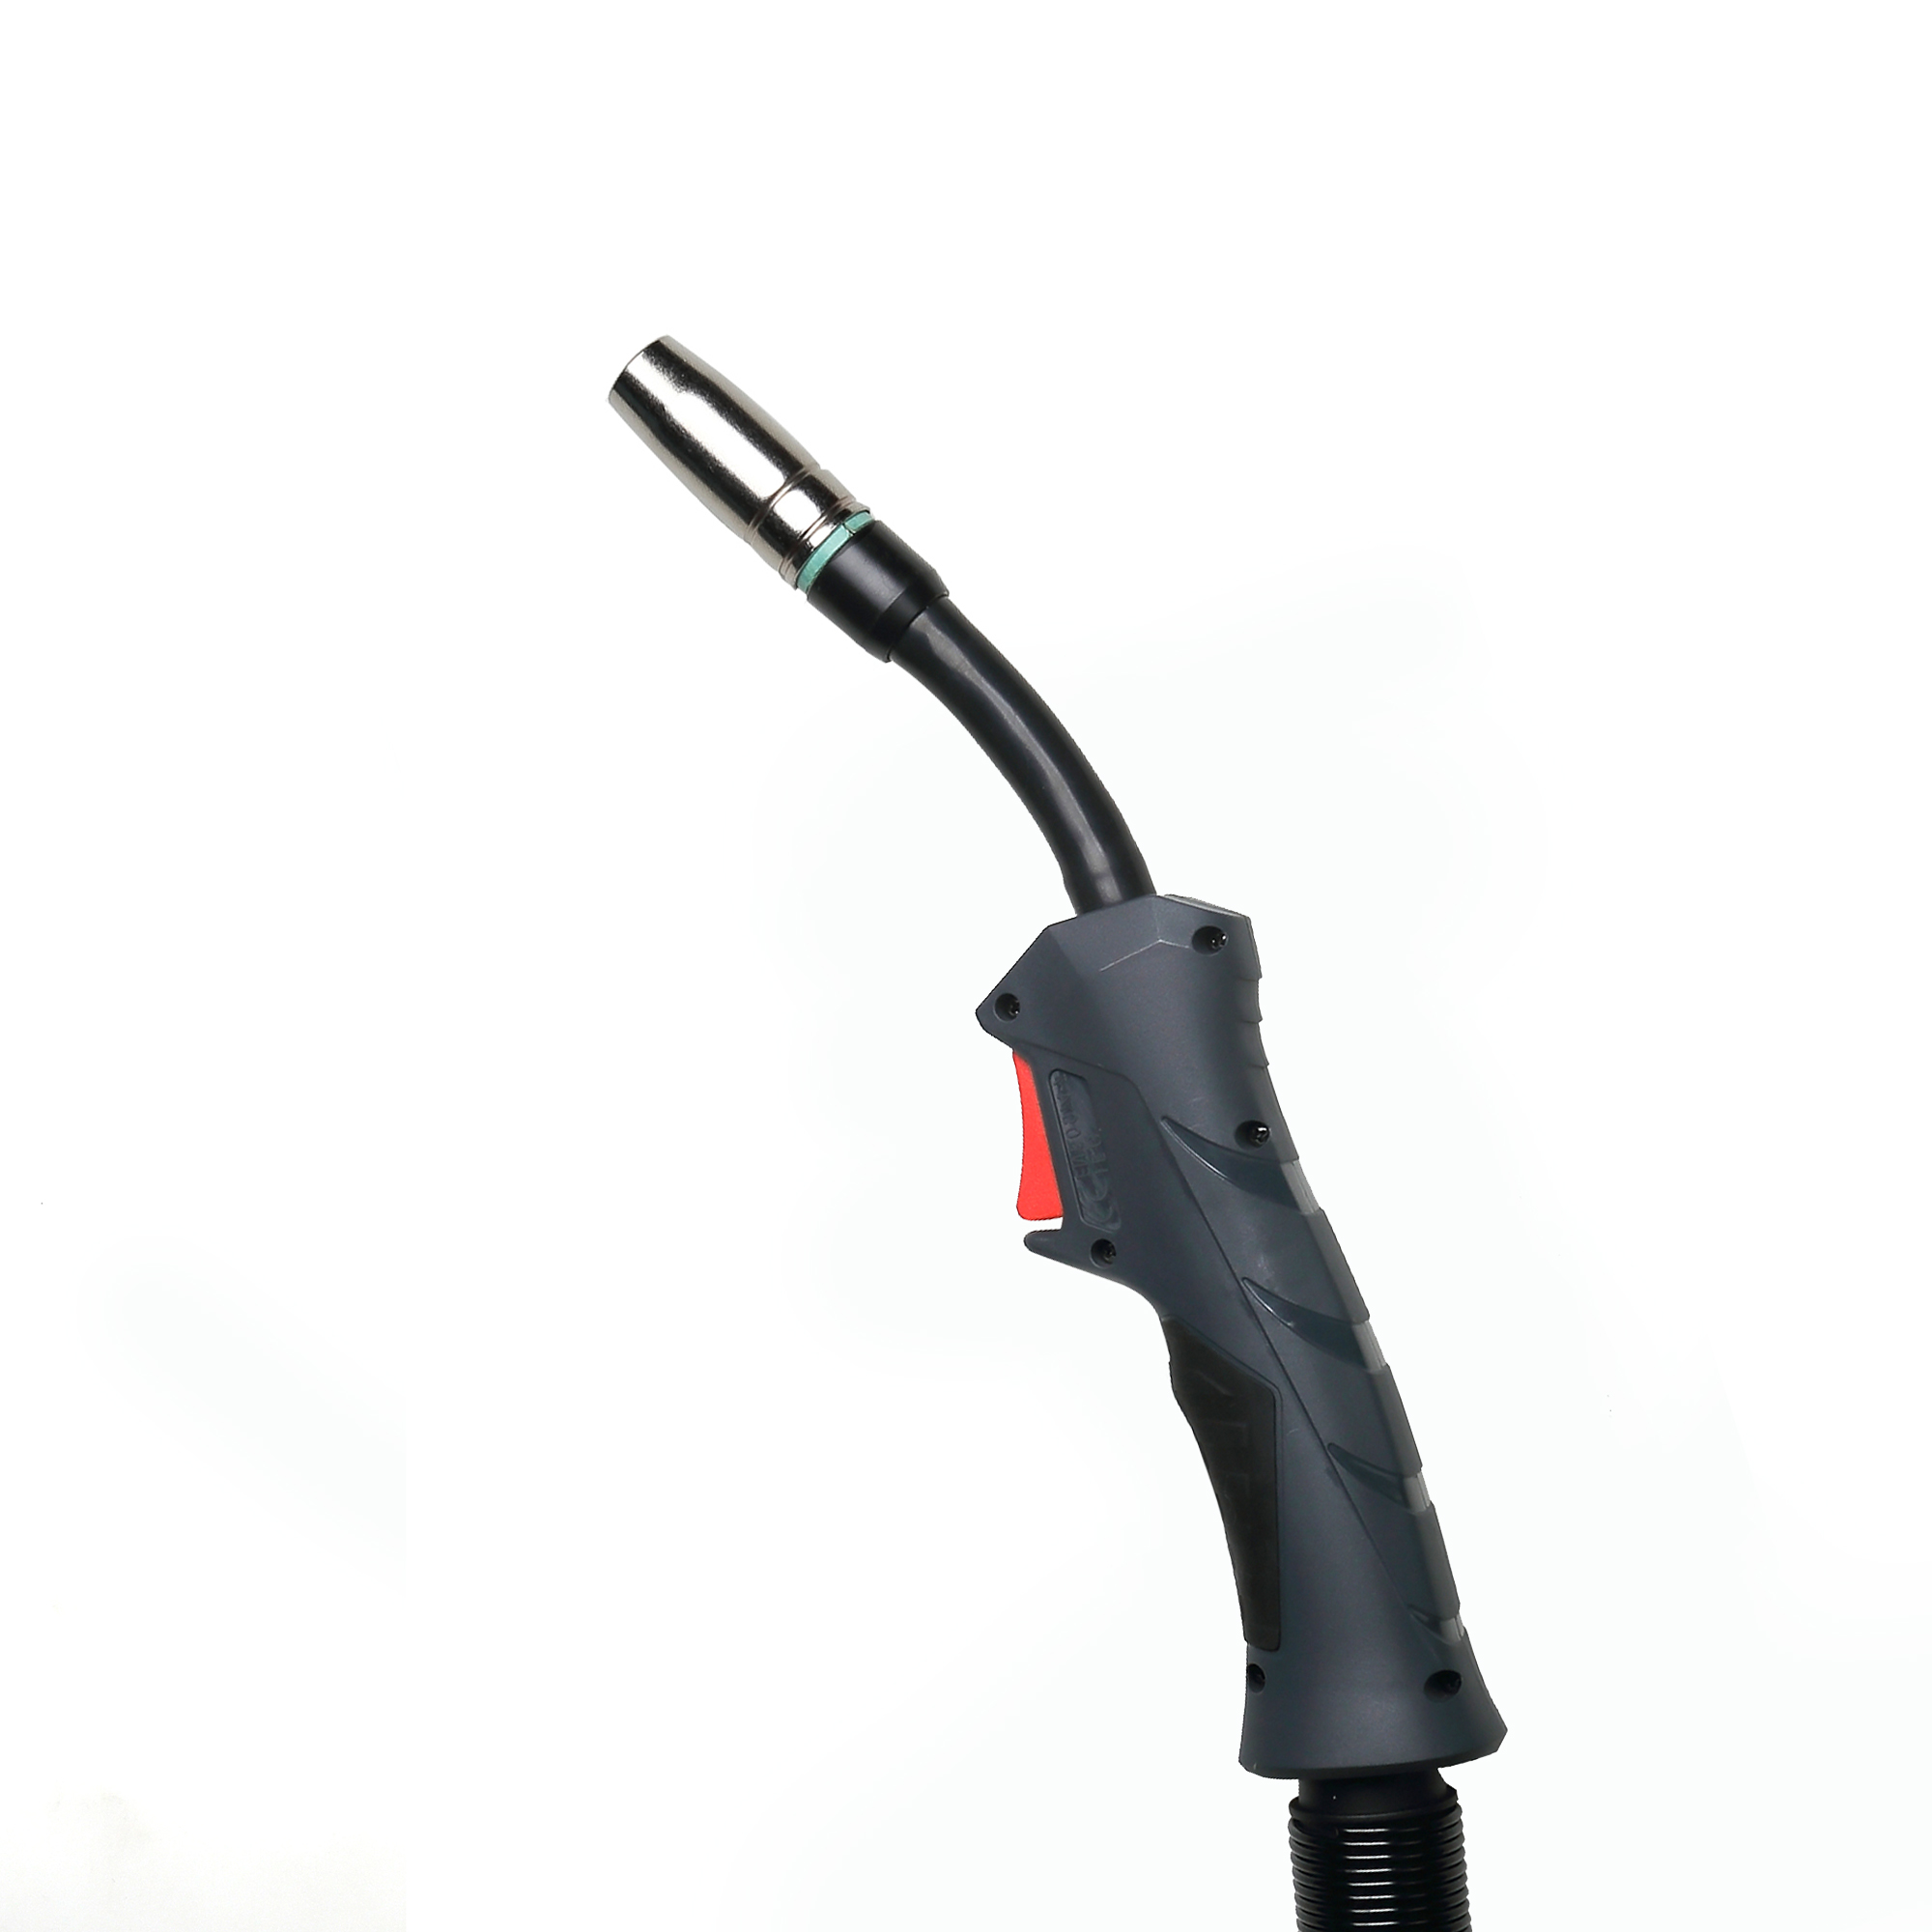 China Manufacturer MB25 Euro MIG Welding Torch